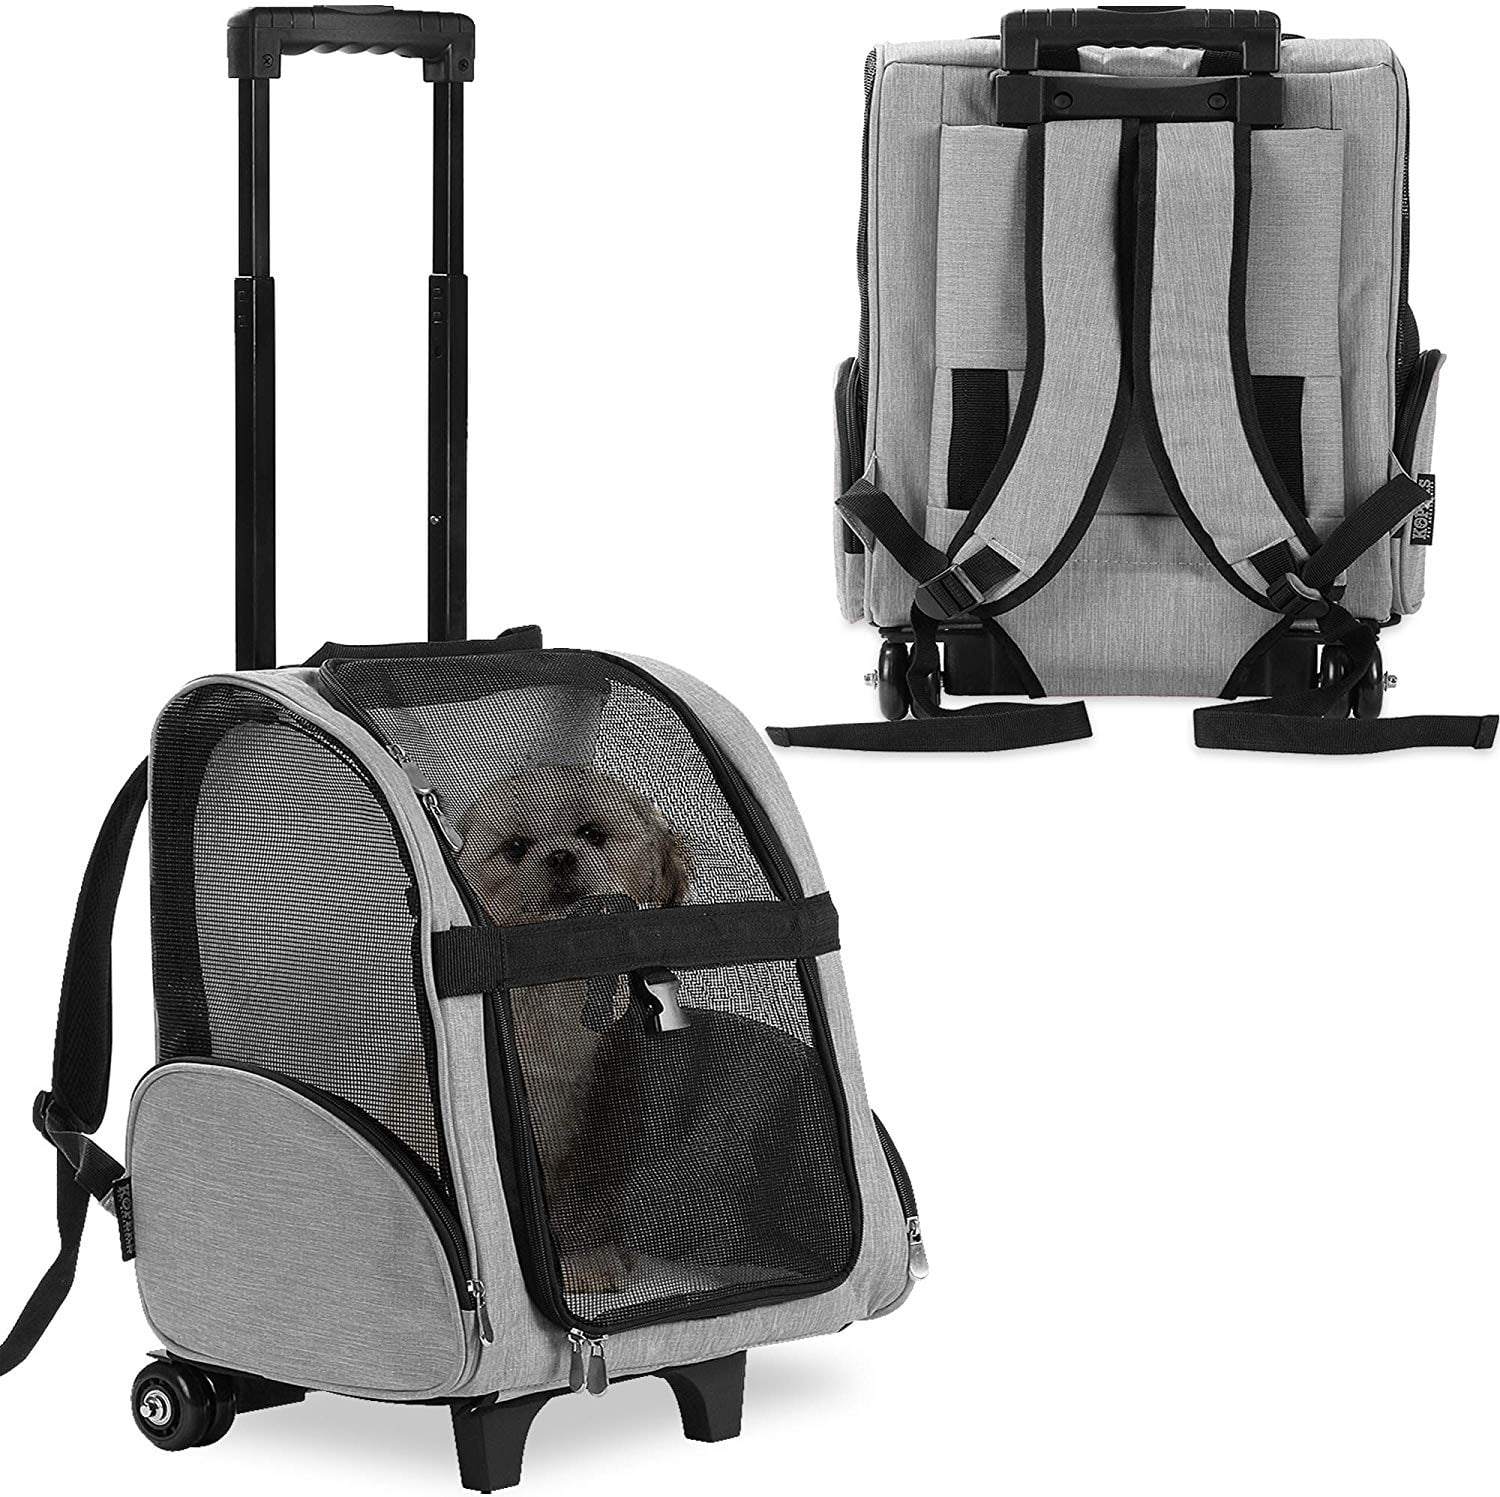 Durable Mesh Panels Detachable Universal Wheels Extendable Handle Pet Travel Carrier Pets Carrier Stroller Wheel Bag for Travel Outdoor Rolling Pet Carrier for Pets Up to 20 Pounds 